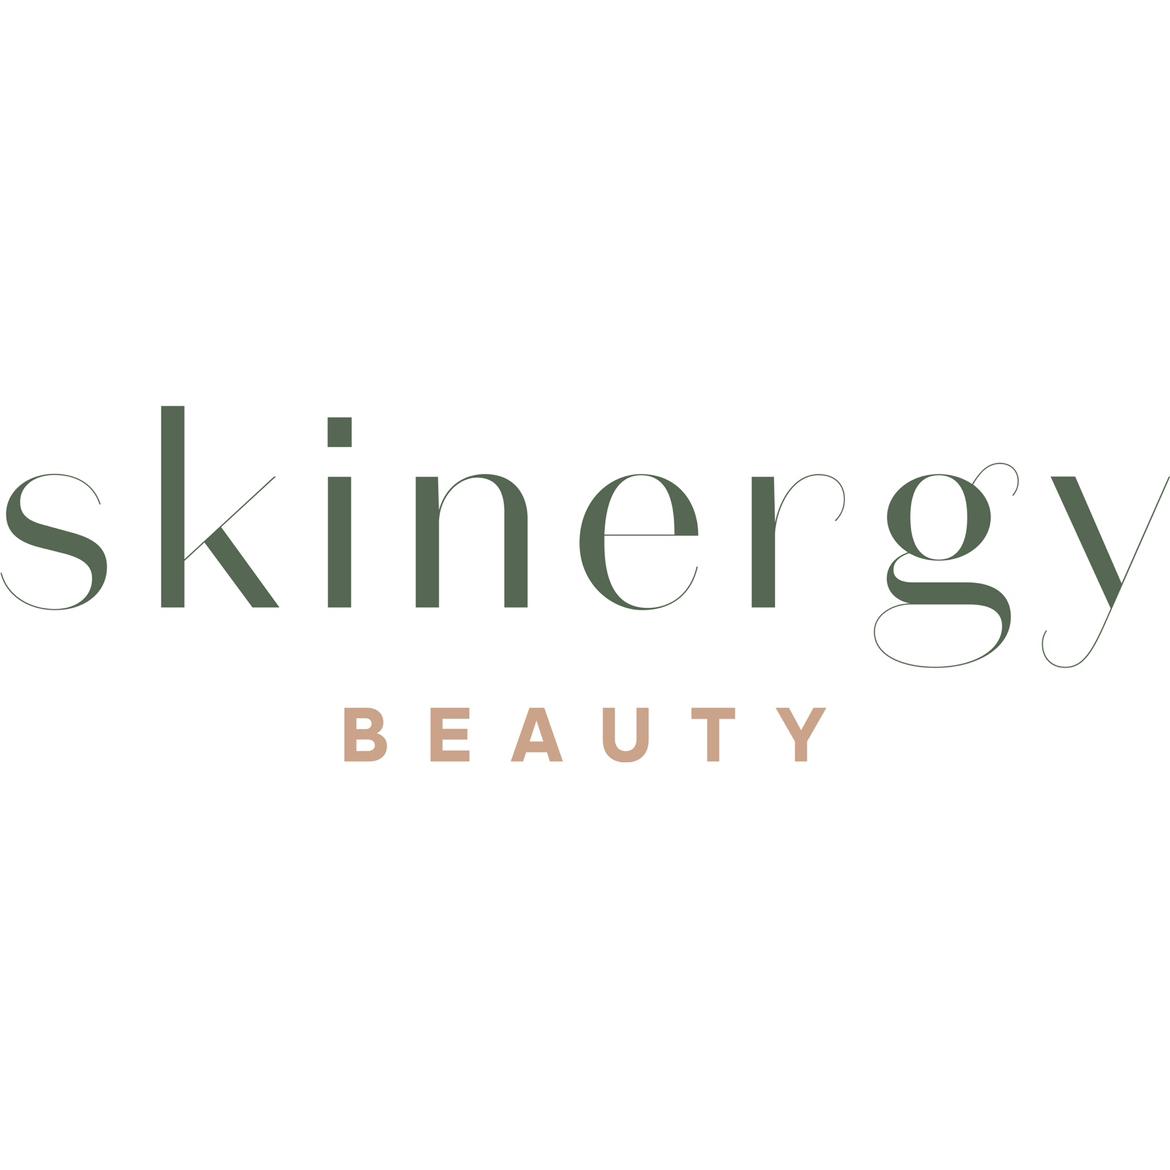 SkinergyBeauty's images